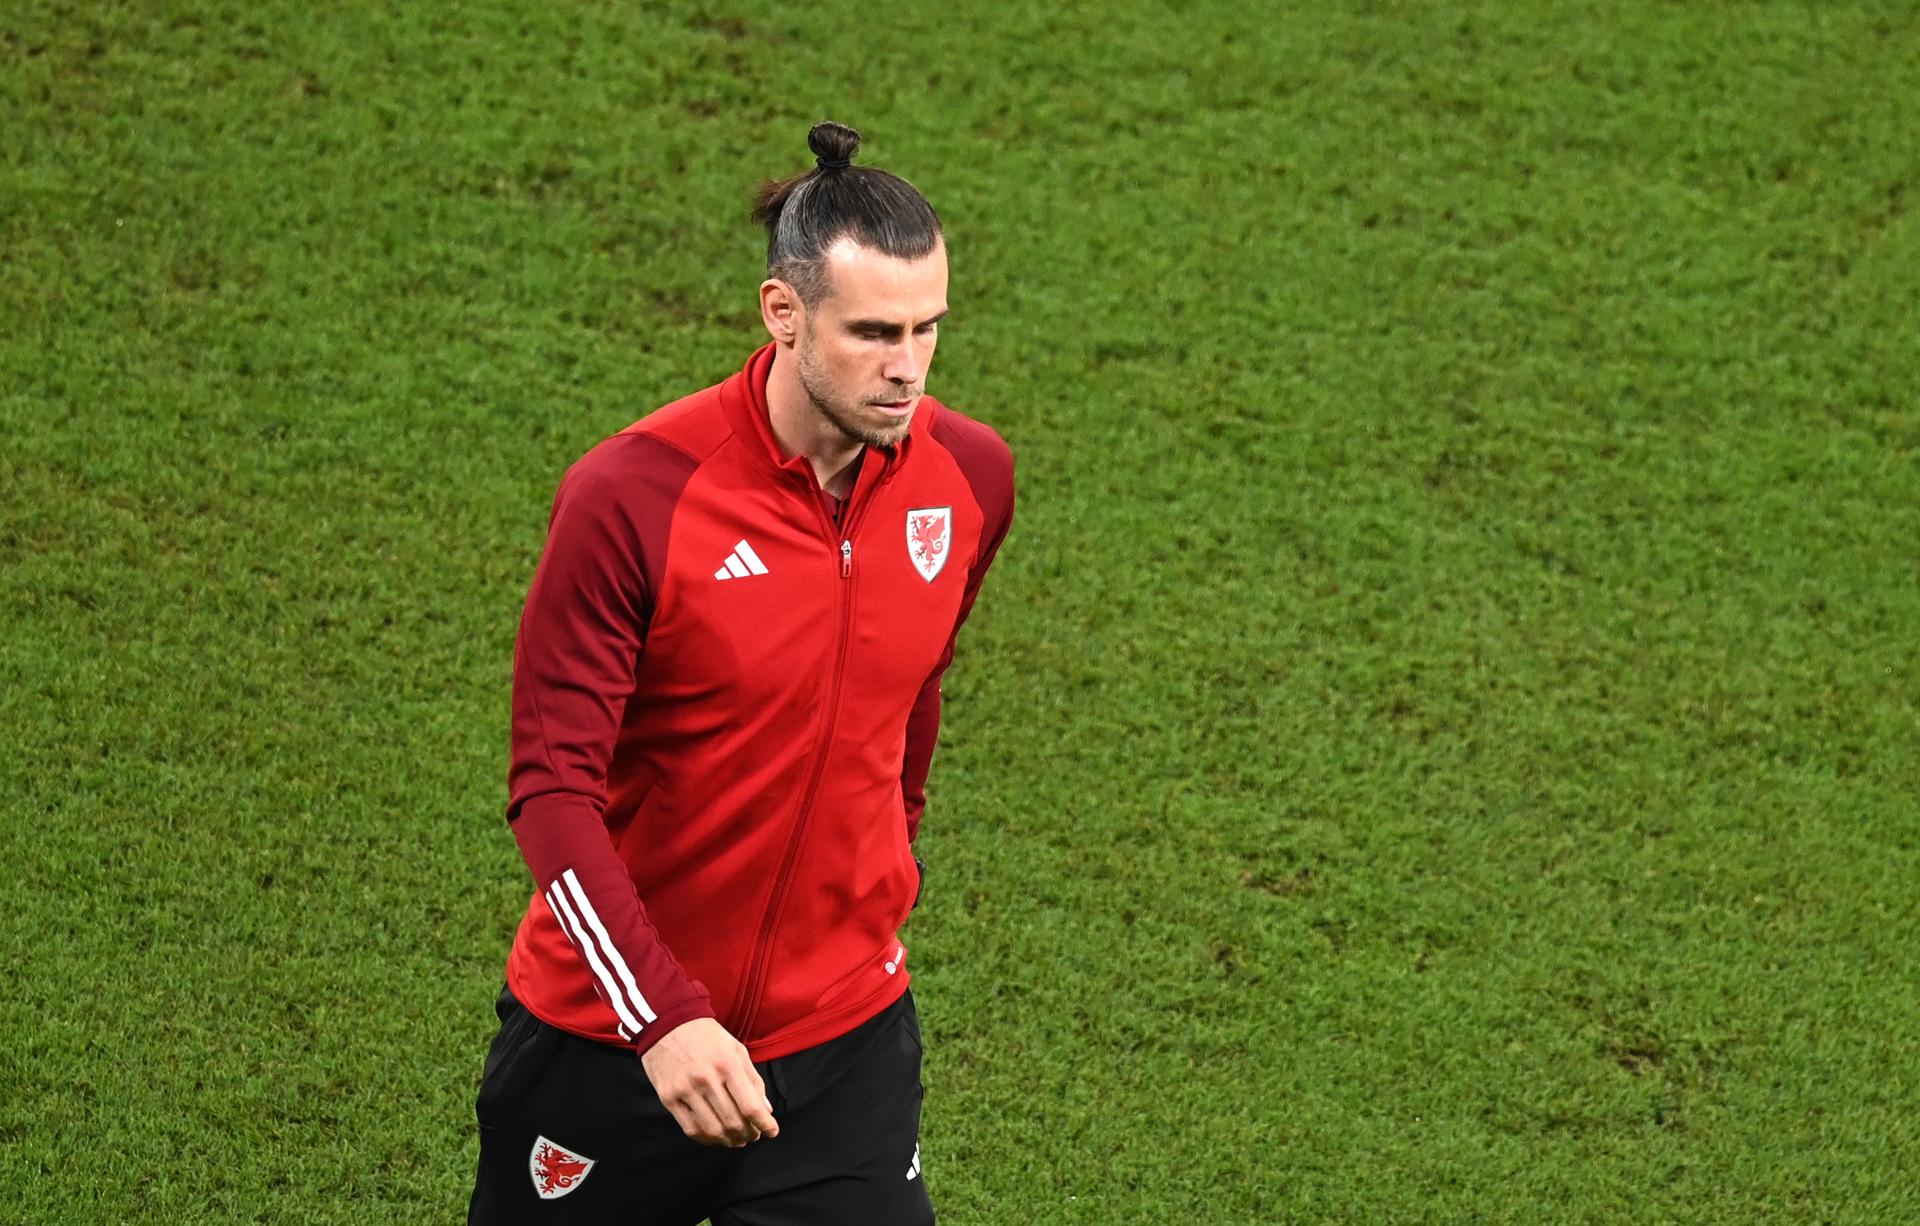 Confirmed: Gareth Bale suffered a hamstring injury during the match against England